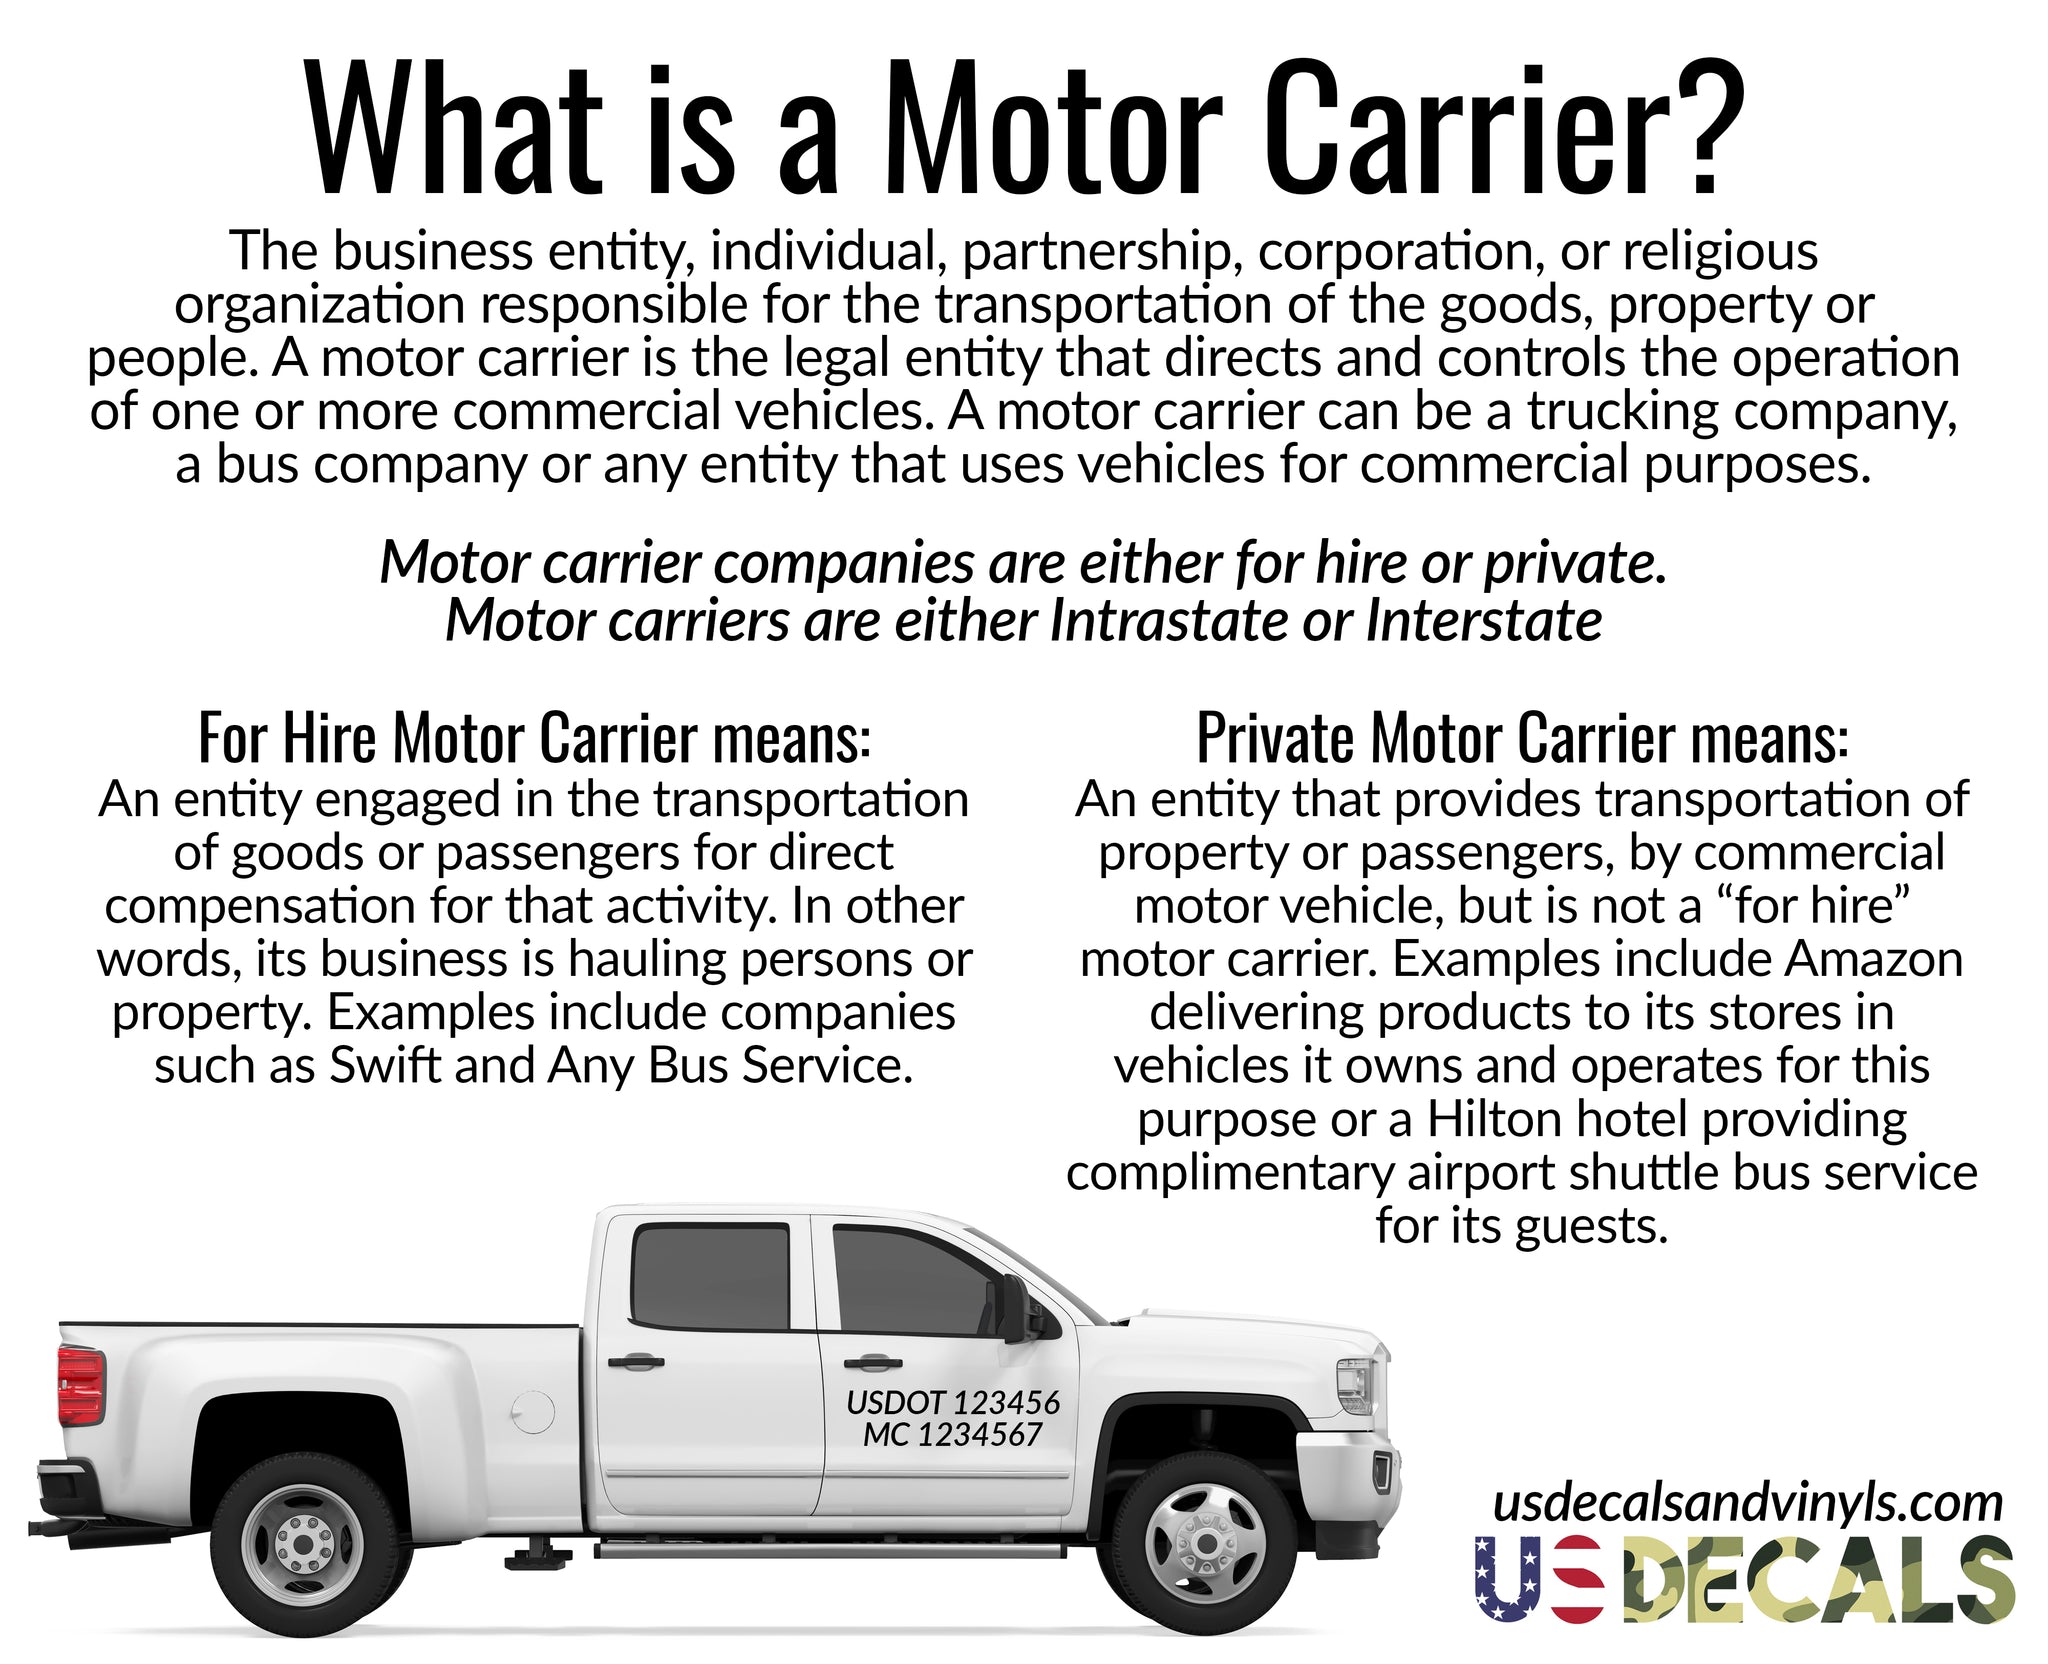 what is a motor carrier? (MC Number)